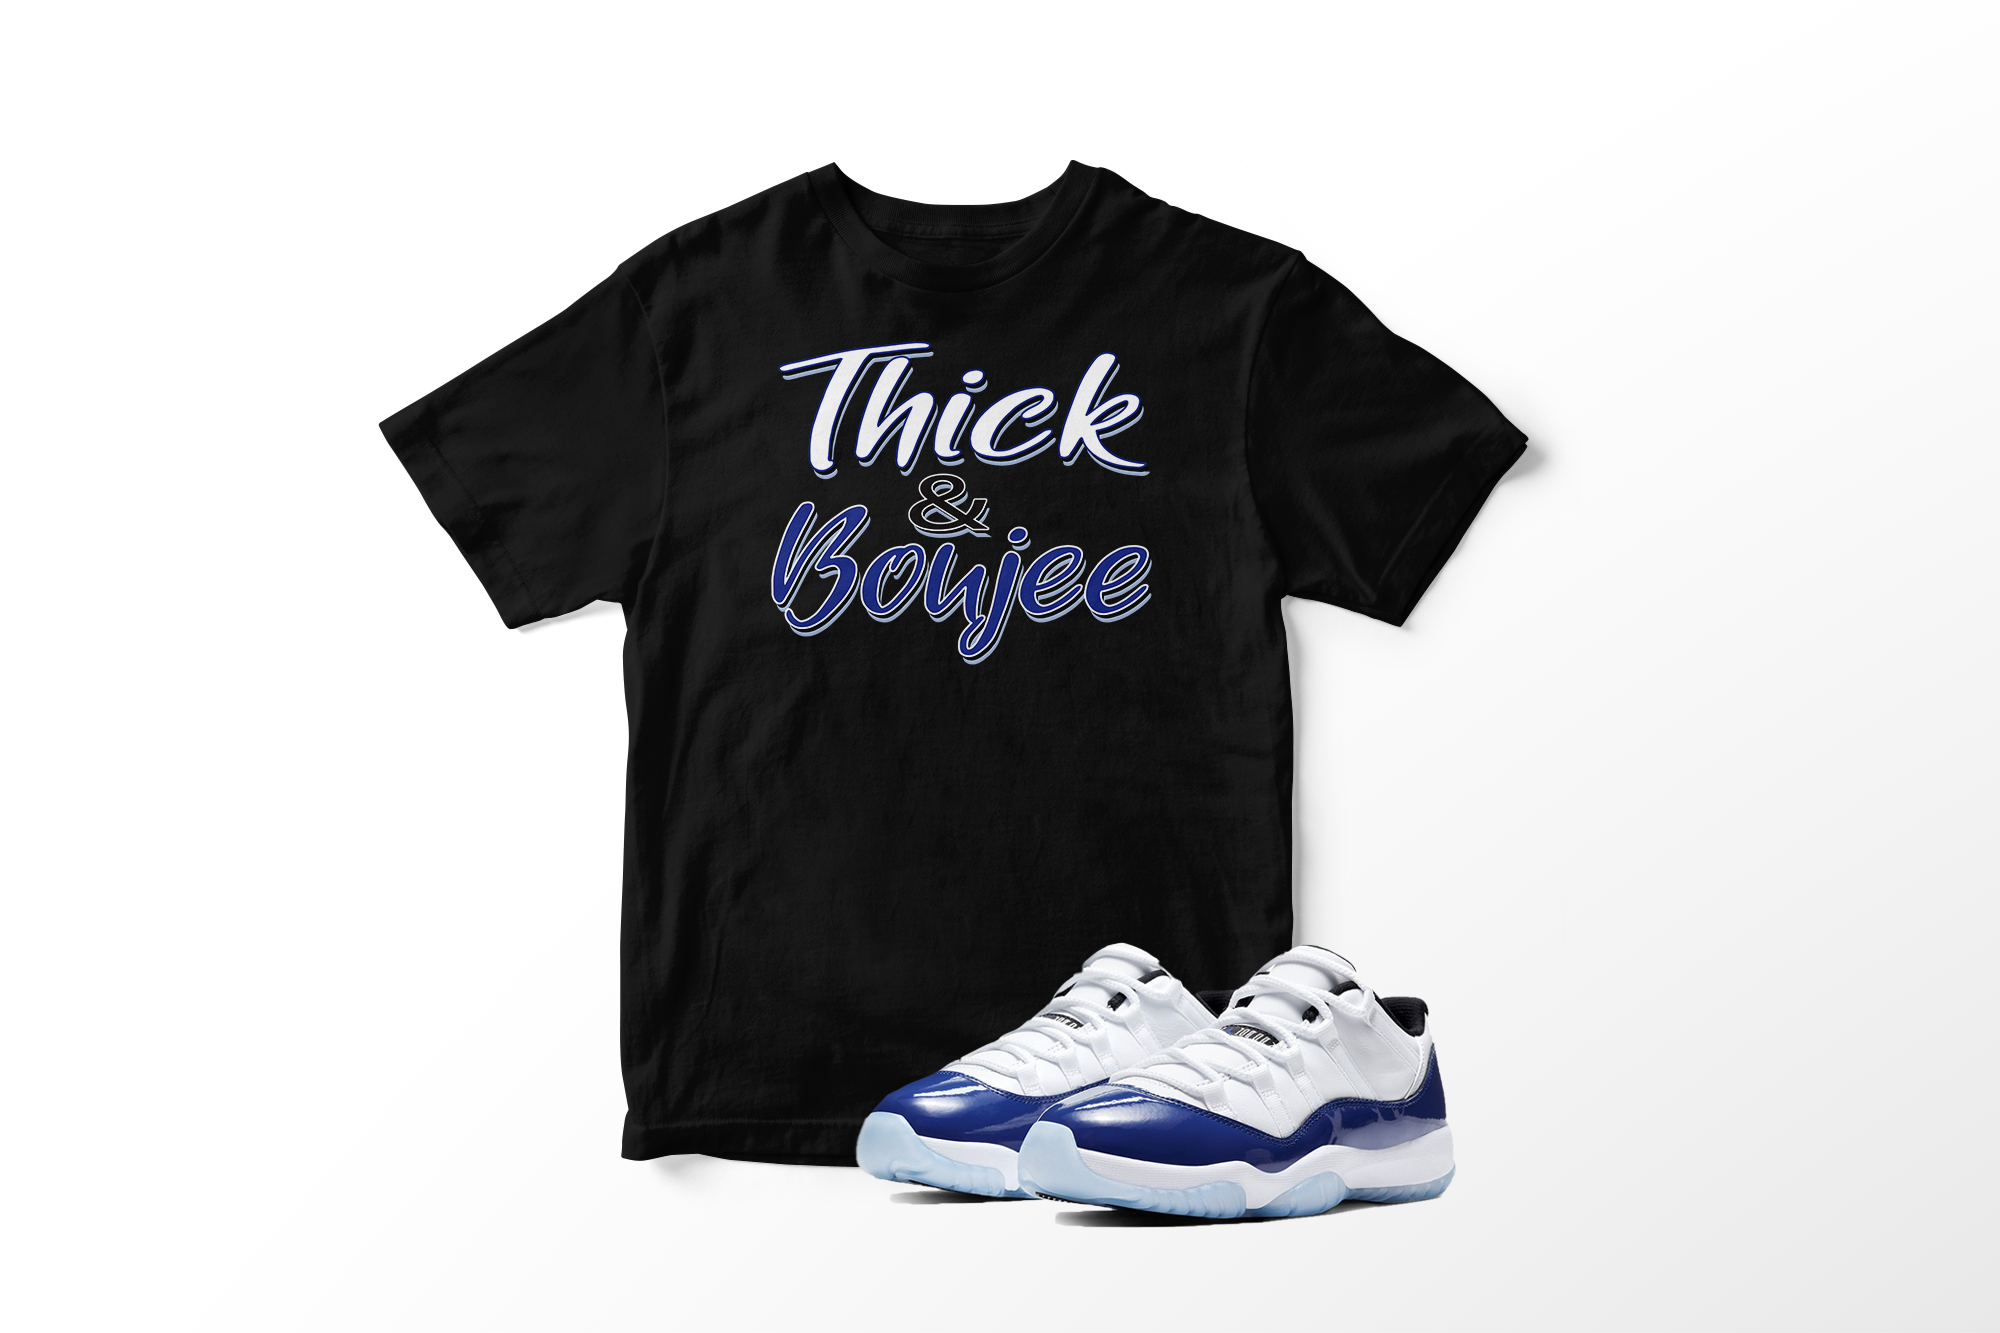 'Thick & Boujee' in Concord Sketch CW Short Sleeve Tee